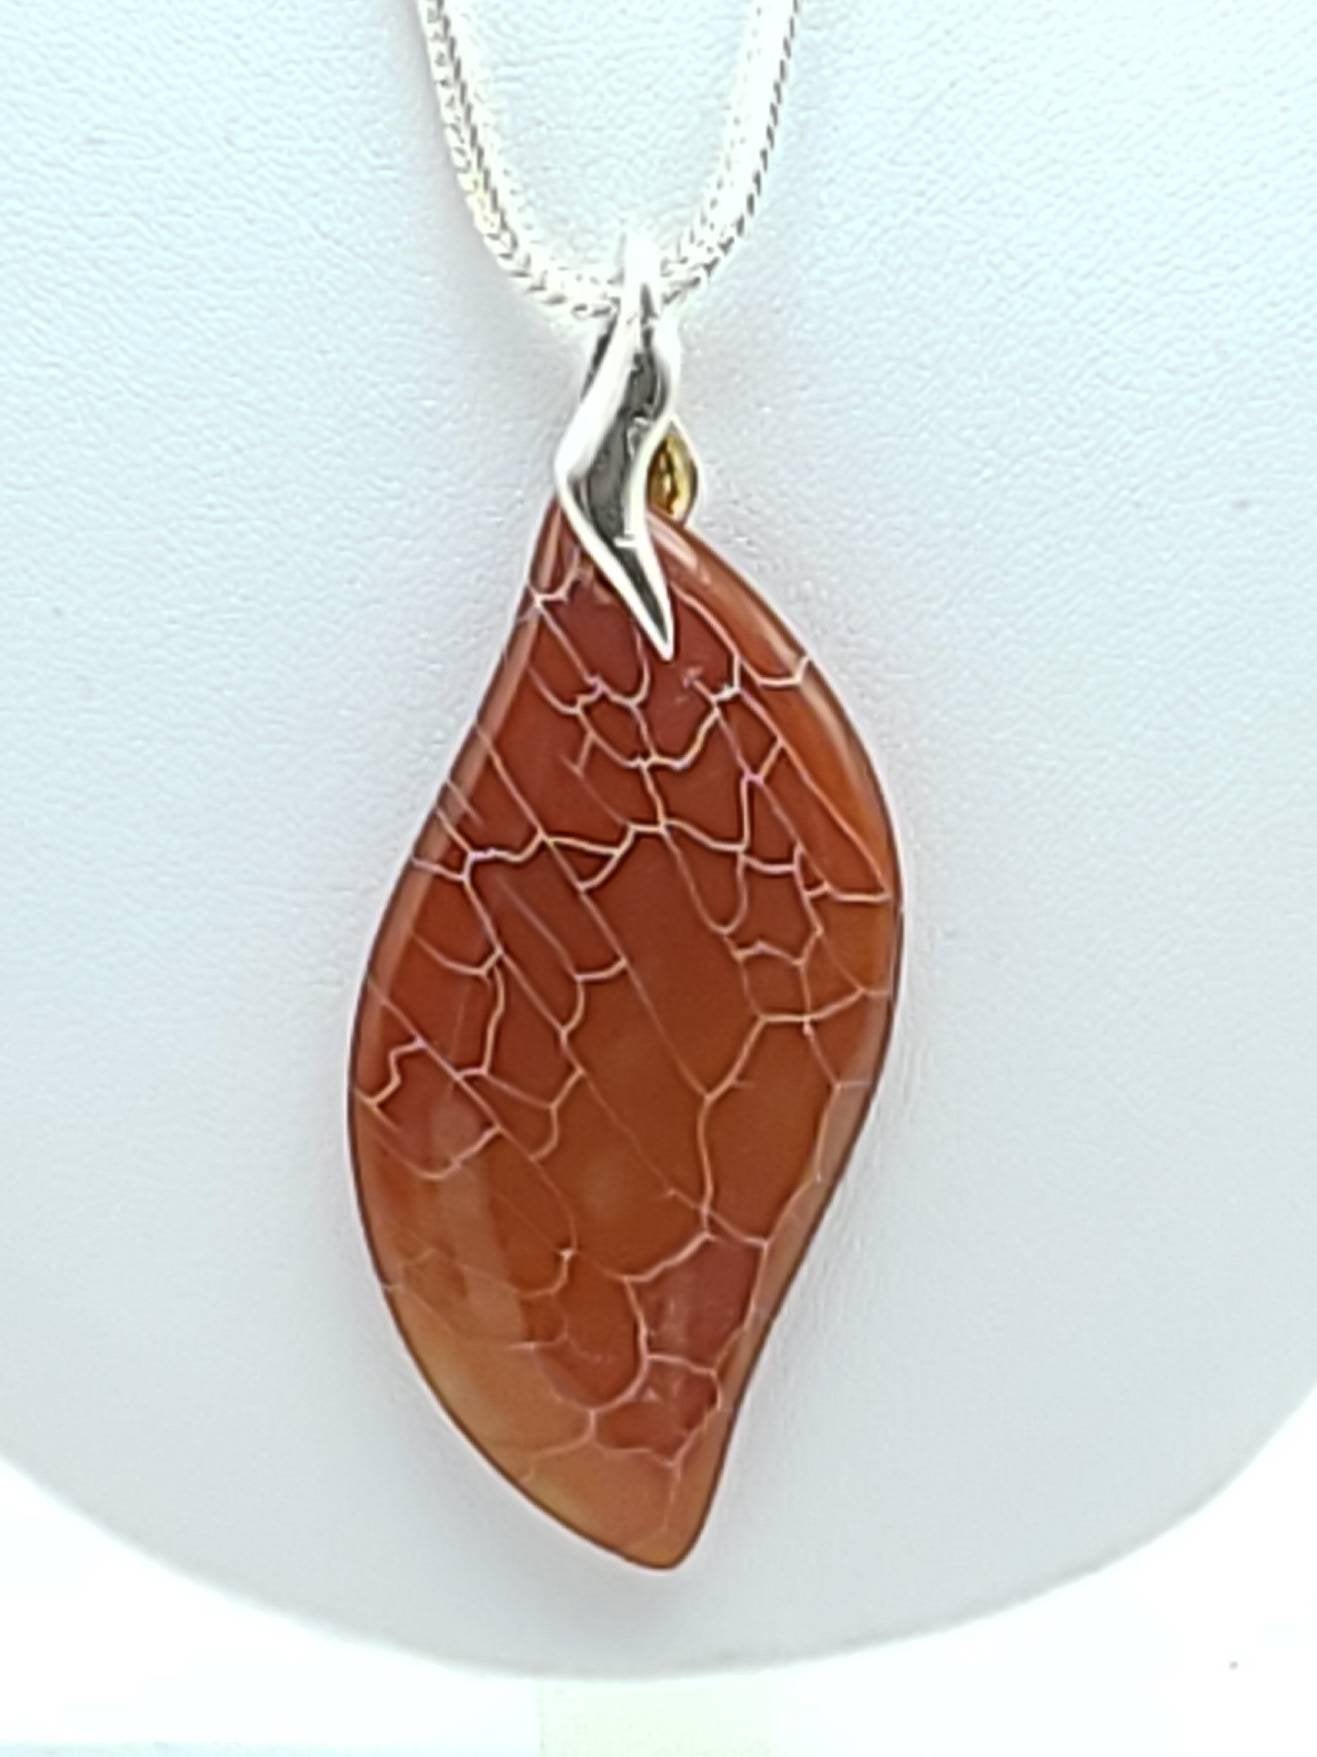 Dragon Vein Agate Pendant Necklace - The Caffeinated Raven